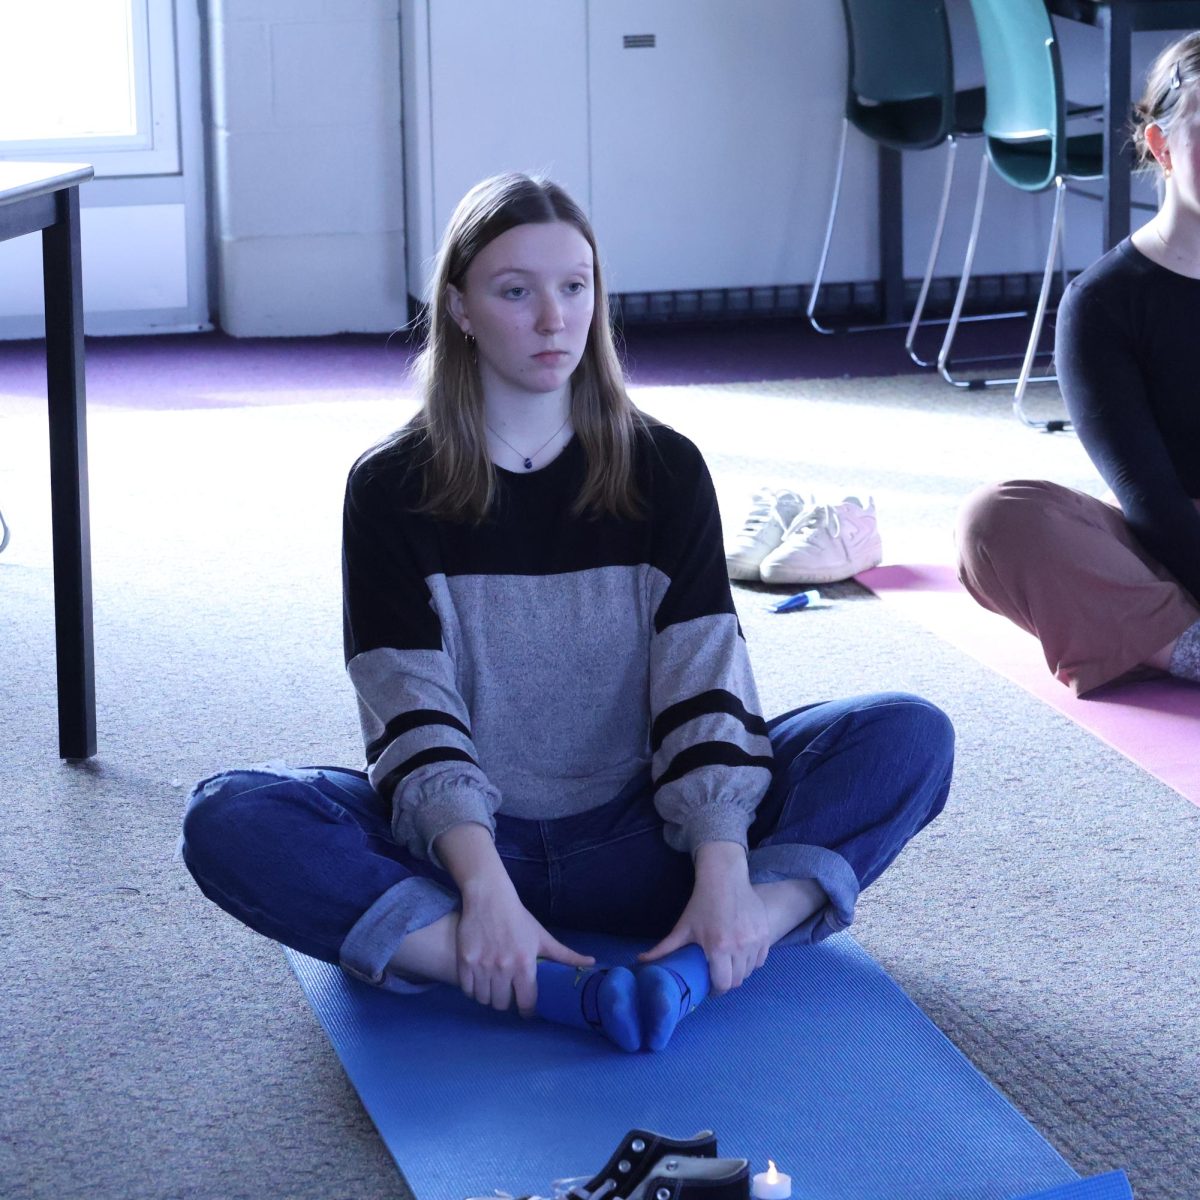 Stretching, senior Macy Wright gets in the butterfly position. On Feb. 6, she joins yoga with sunny during srt.